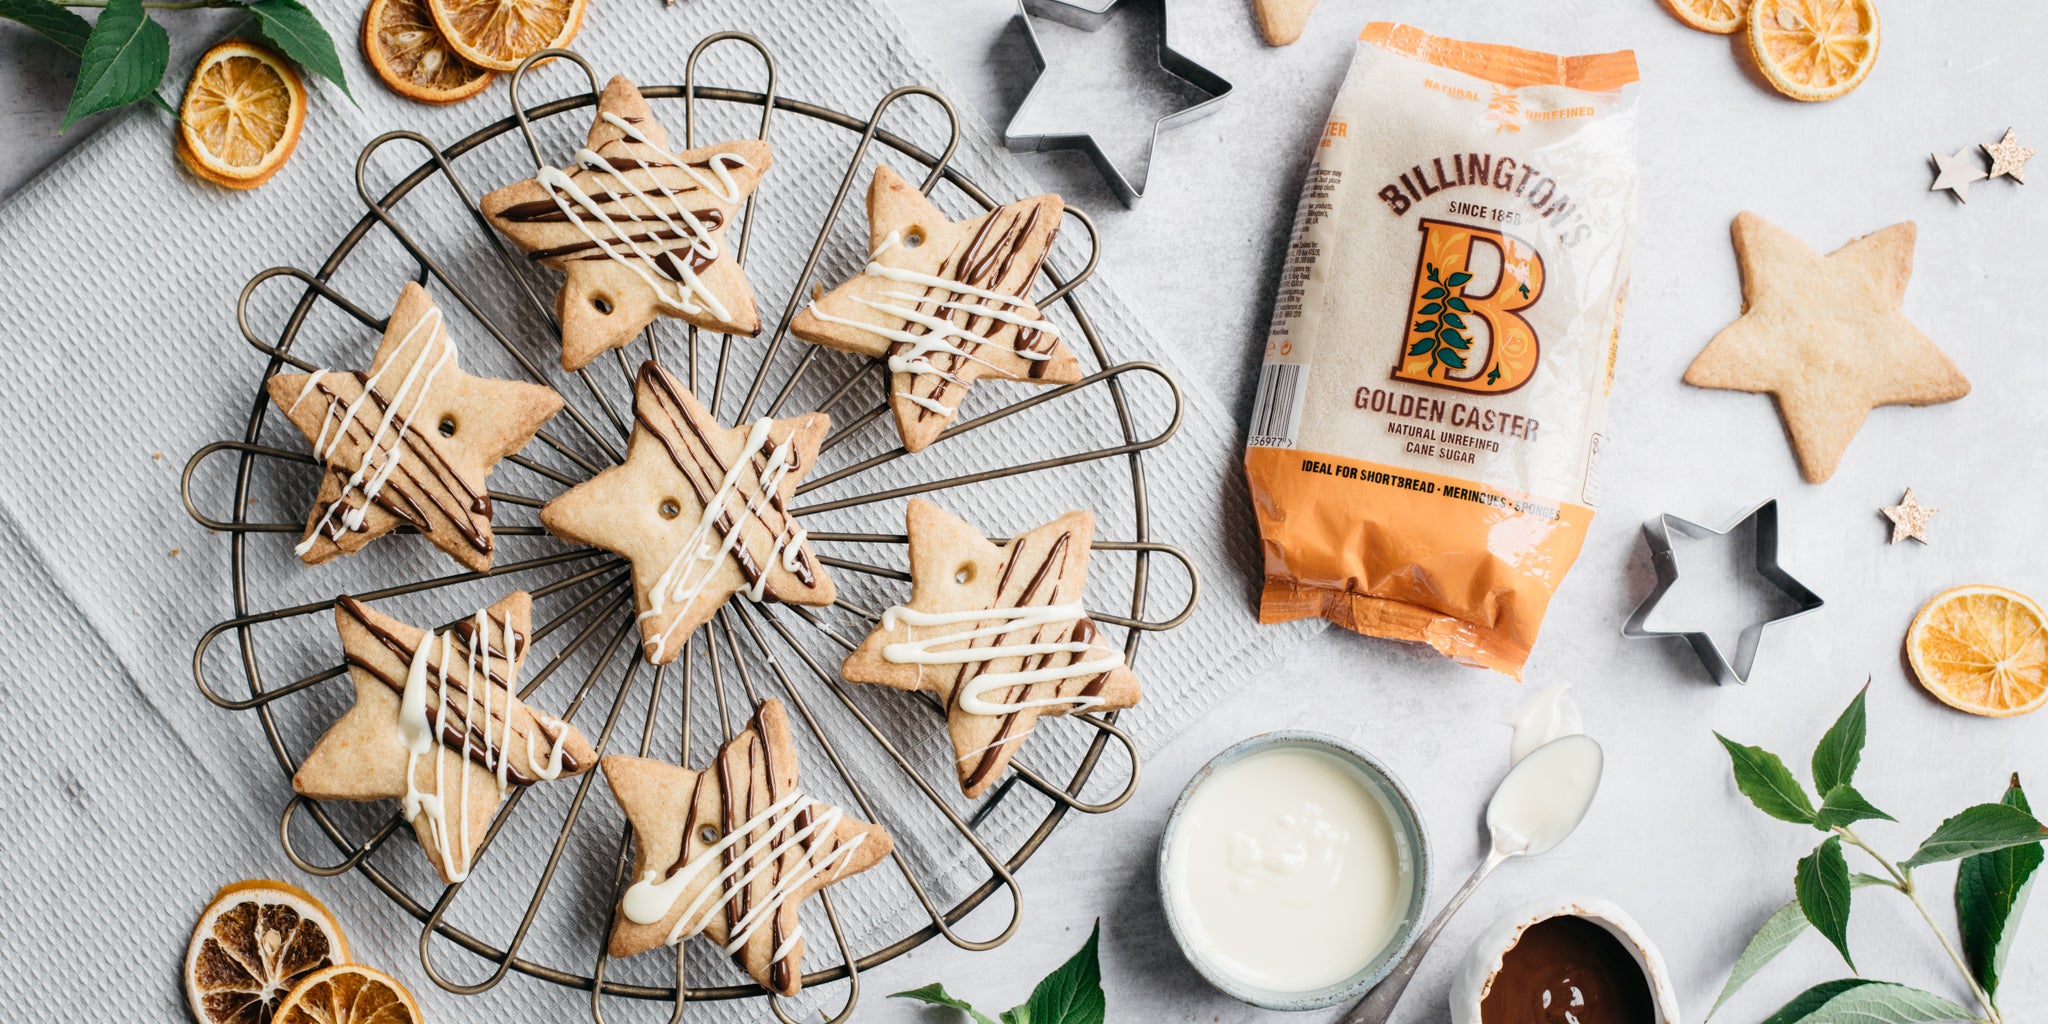 Top view of Orange & Ginger shortbread stars next to a bag of Billington's golden caster sugar, cookie cutters and melted chocolate on a spoon